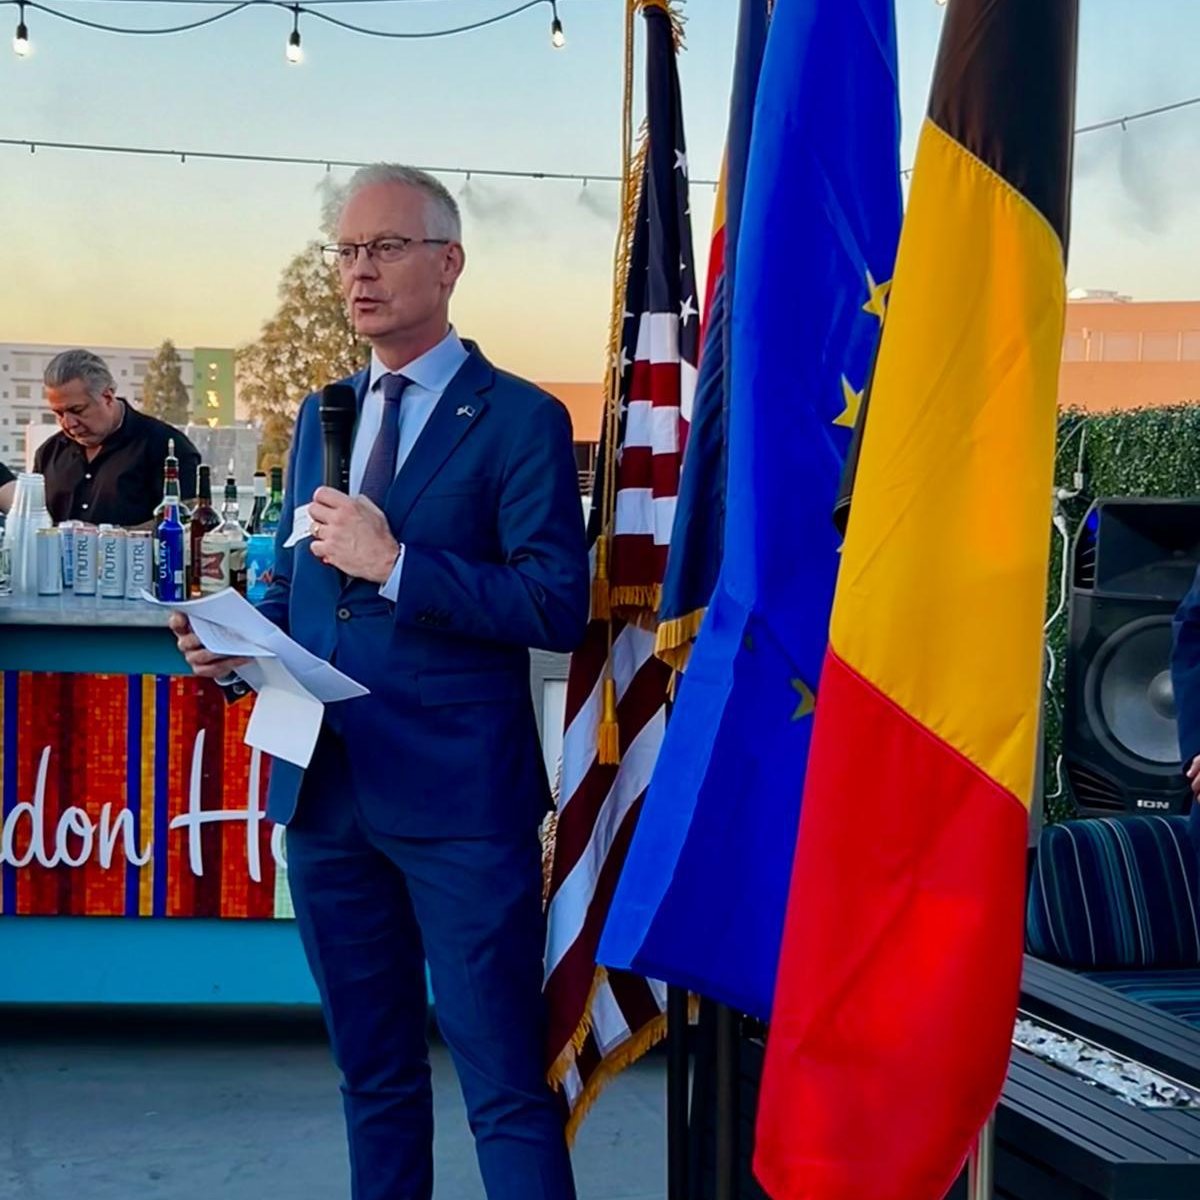 Fruitful visit to #Arizona. In just 3 days, 22 EU DCMs met members from the state House of Representatives, addressed local dignitaries including Honorary Consuls, interacted with @ASU students/faculty, and visited @WeAreCPLC. Thanks to our stellar hosts, including @pcfrarizona!